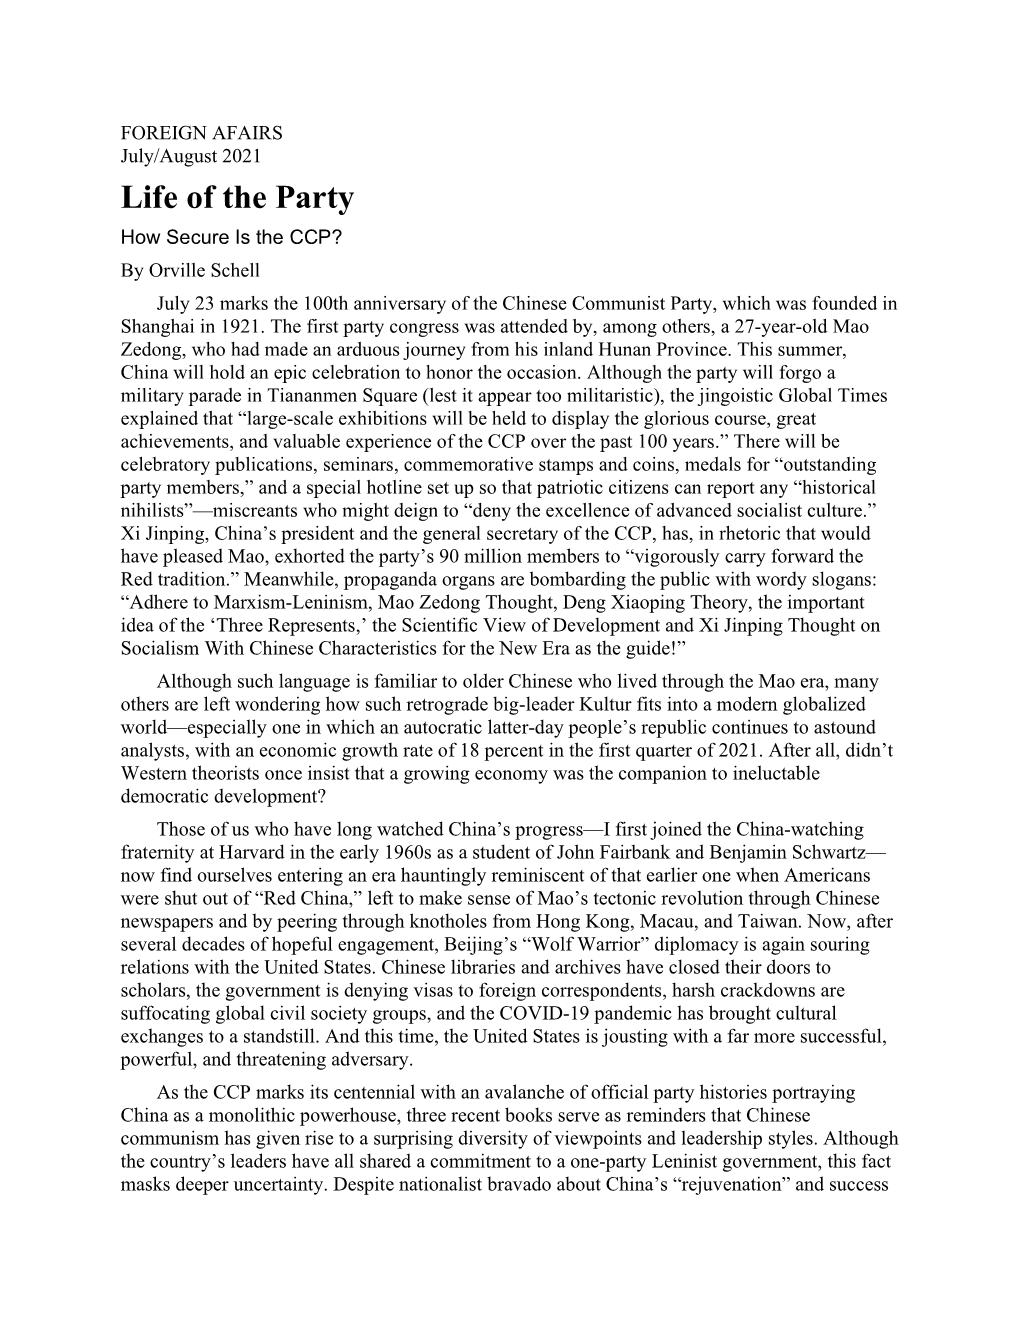 Life of the Party How Secure Is the CCP? by Orville Schell July 23 Marks the 100Th Anniversary of the Chinese Communist Party, Which Was Founded in Shanghai in 1921